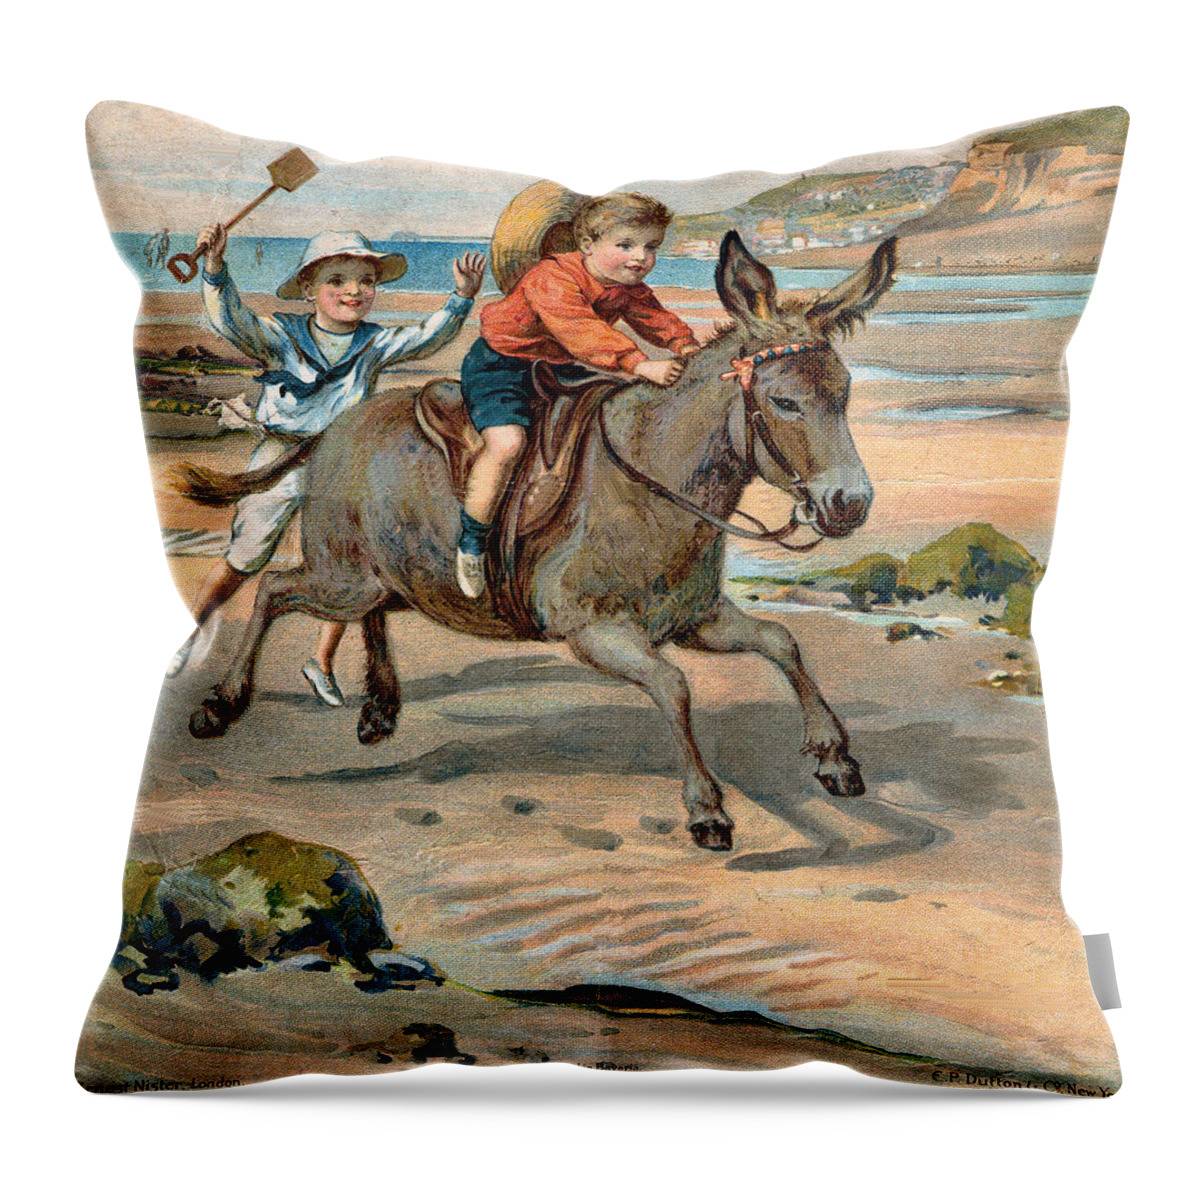 Little Girl At The Beach Throw Pillow featuring the digital art Galloping Donkey At The Beach by Unknown